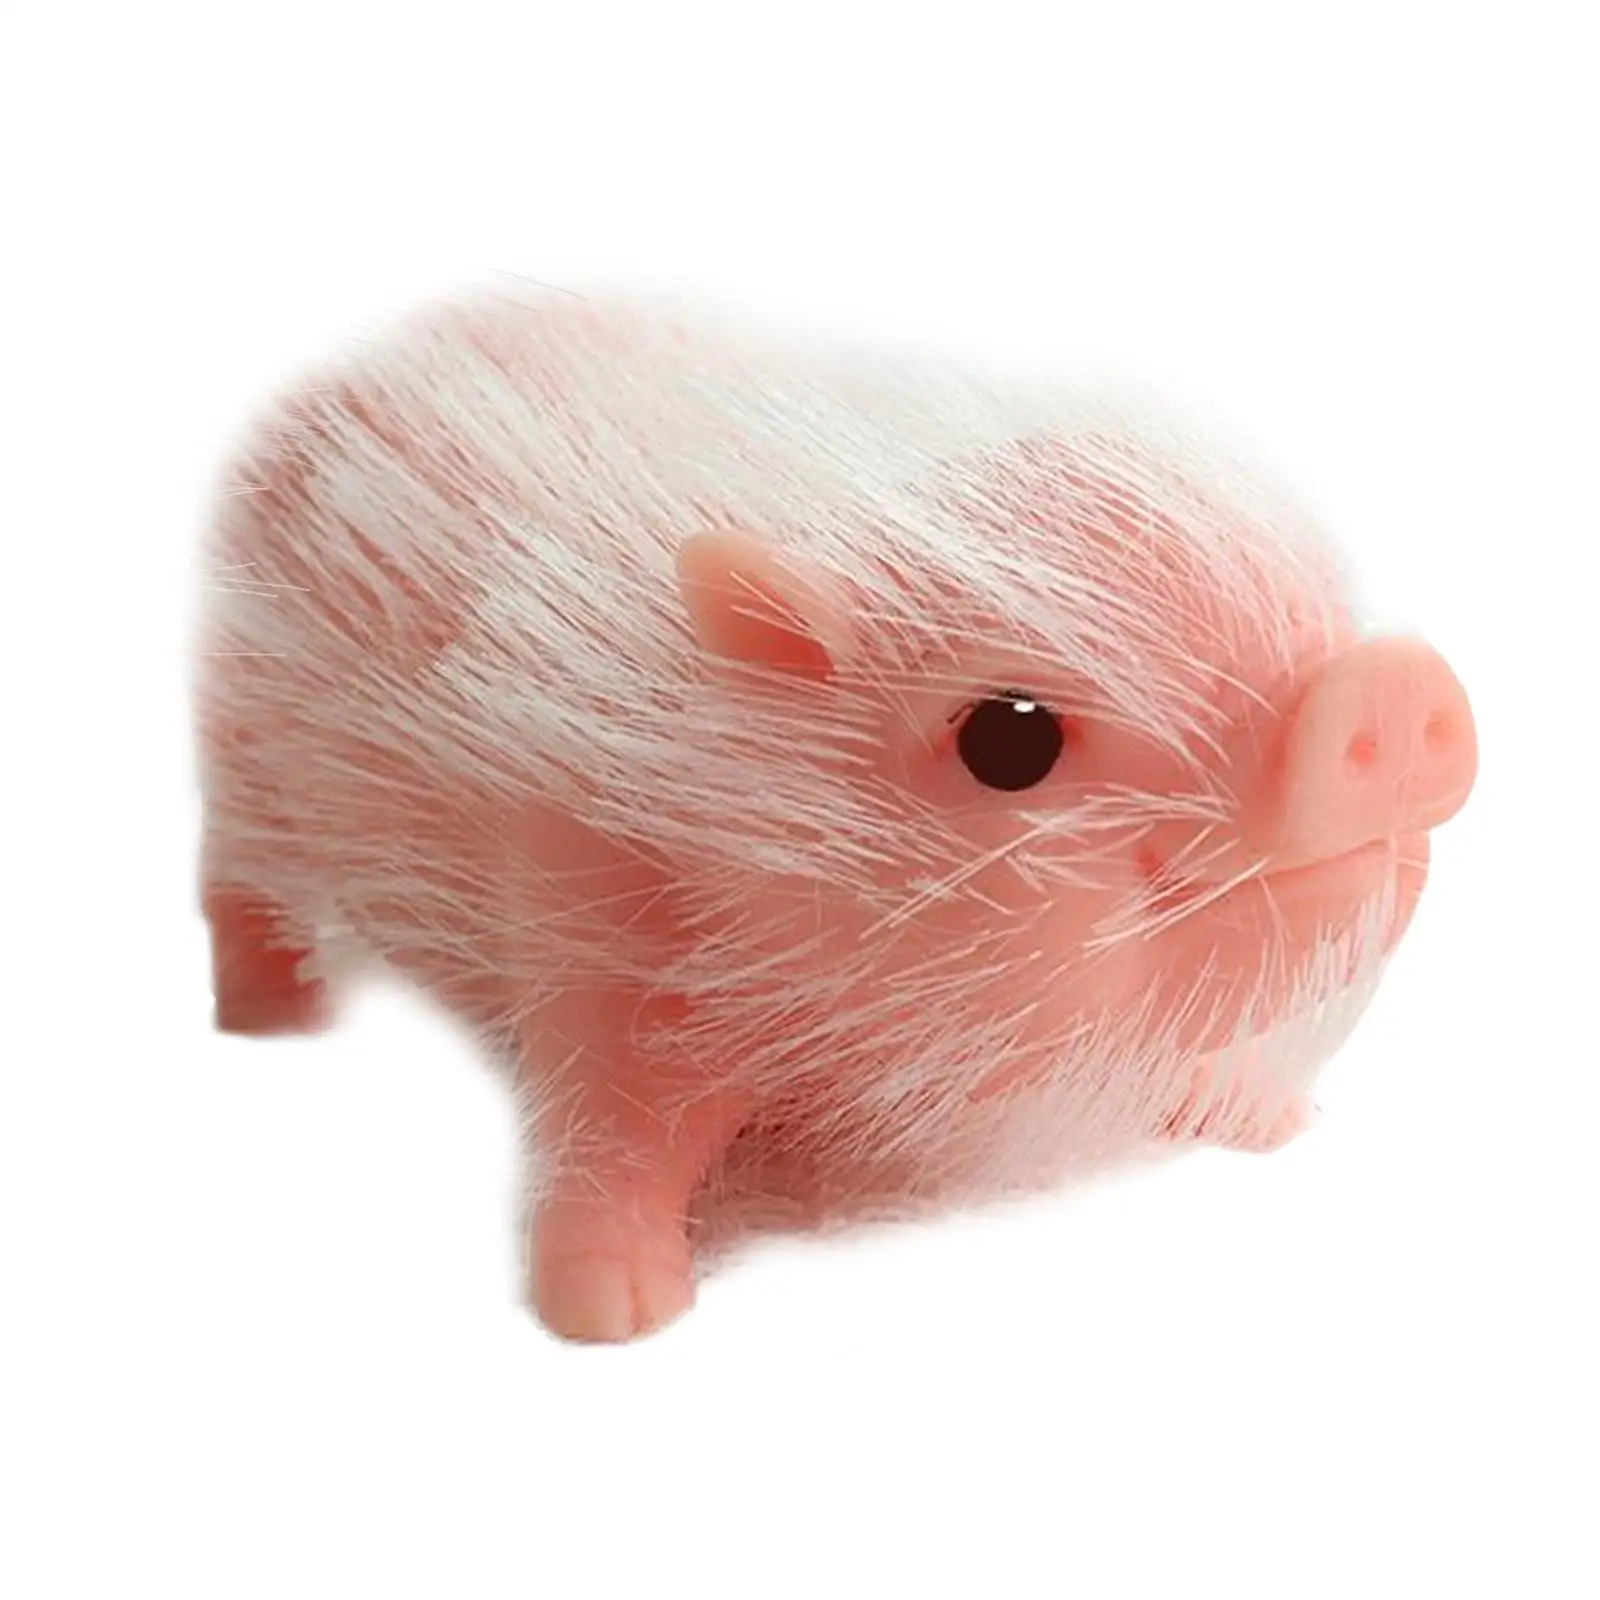 Lovely Silicone Piglet Full Body Silicon Fake Animals Soft Reborn Animals for Home Display Birthday Gift Cosplay Party Favors